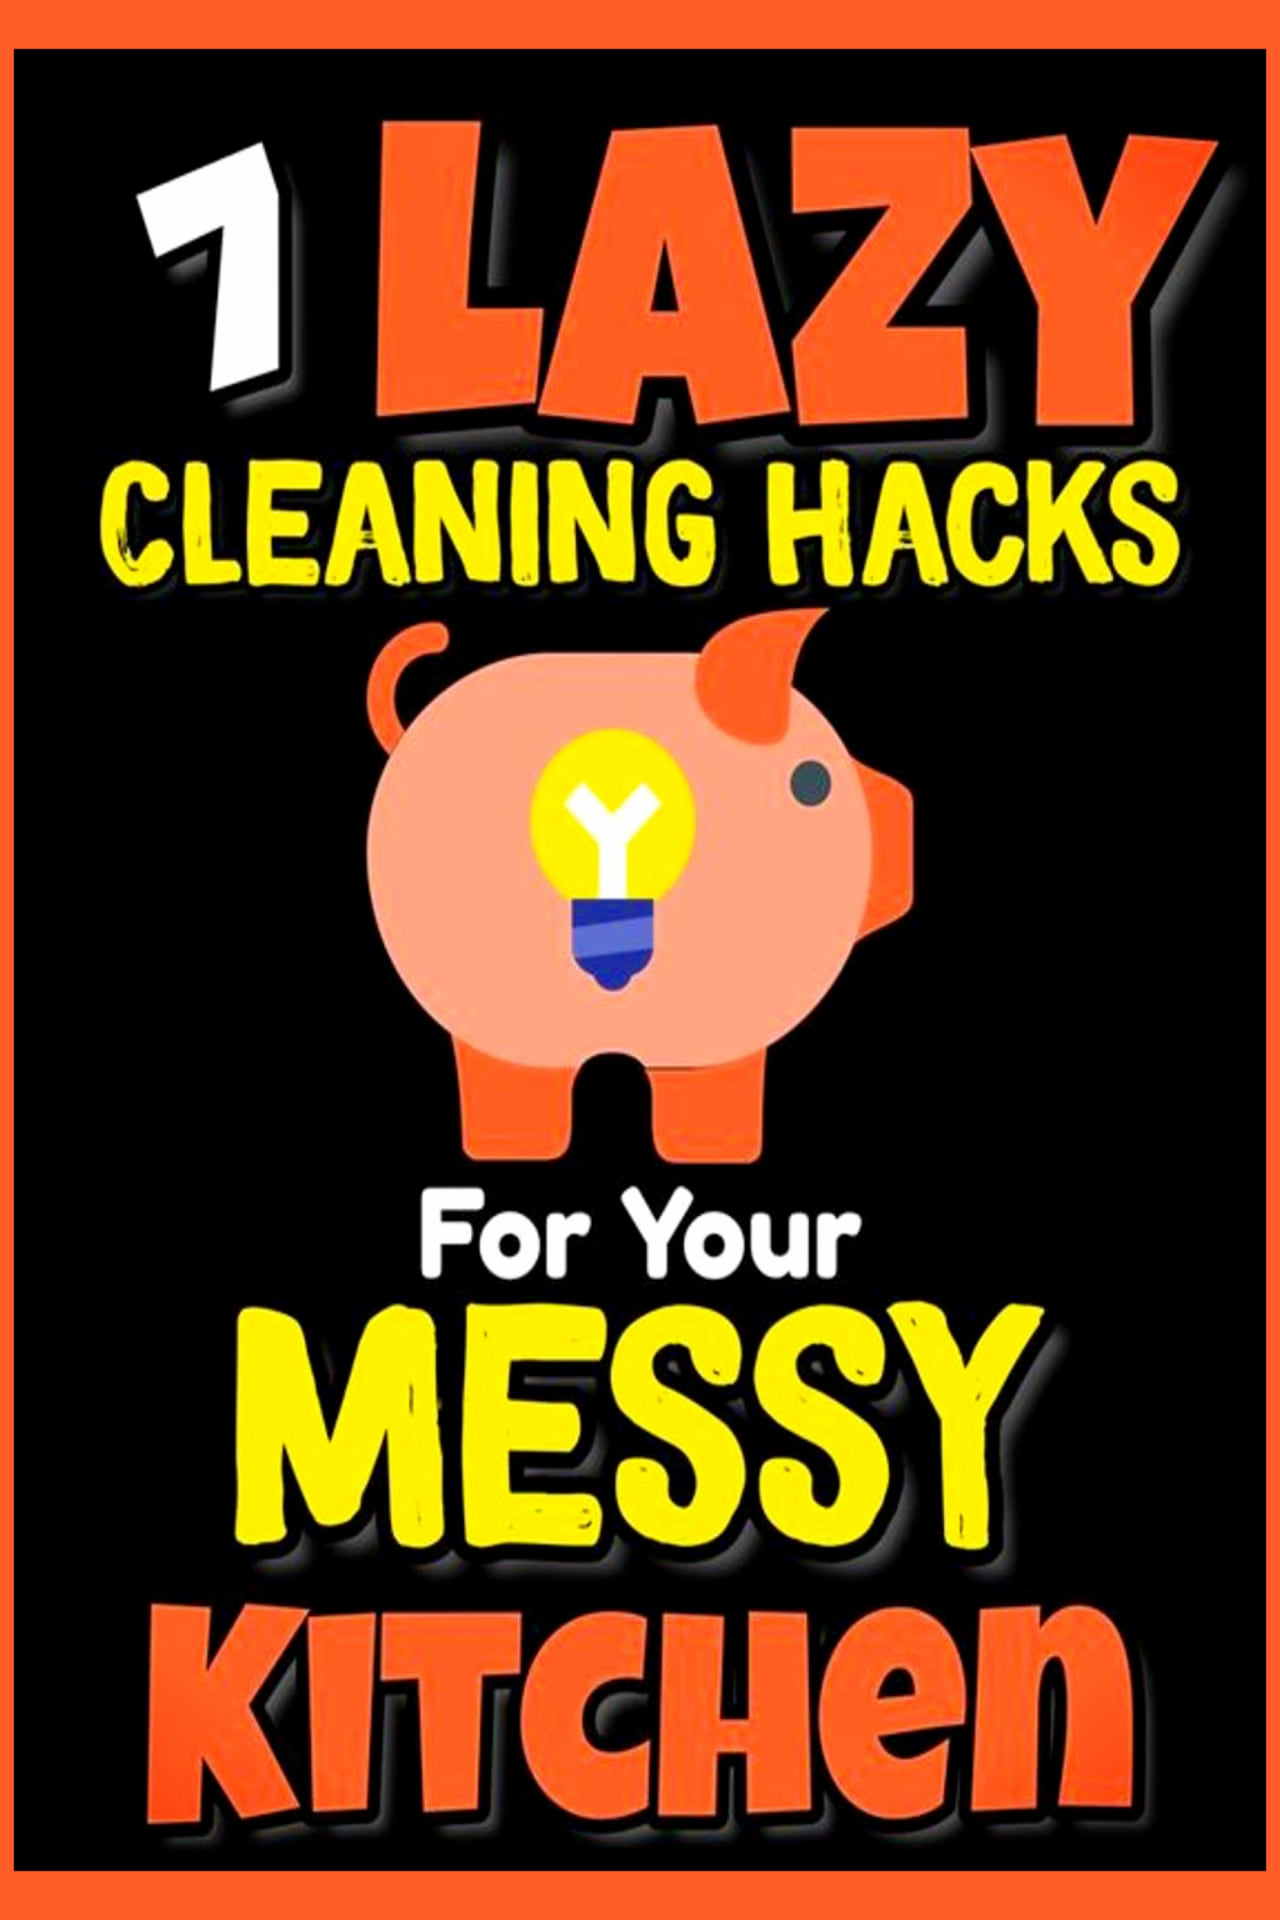 Lazy cleaning hacks tips and tricks to get your kitchen clean fast and easy